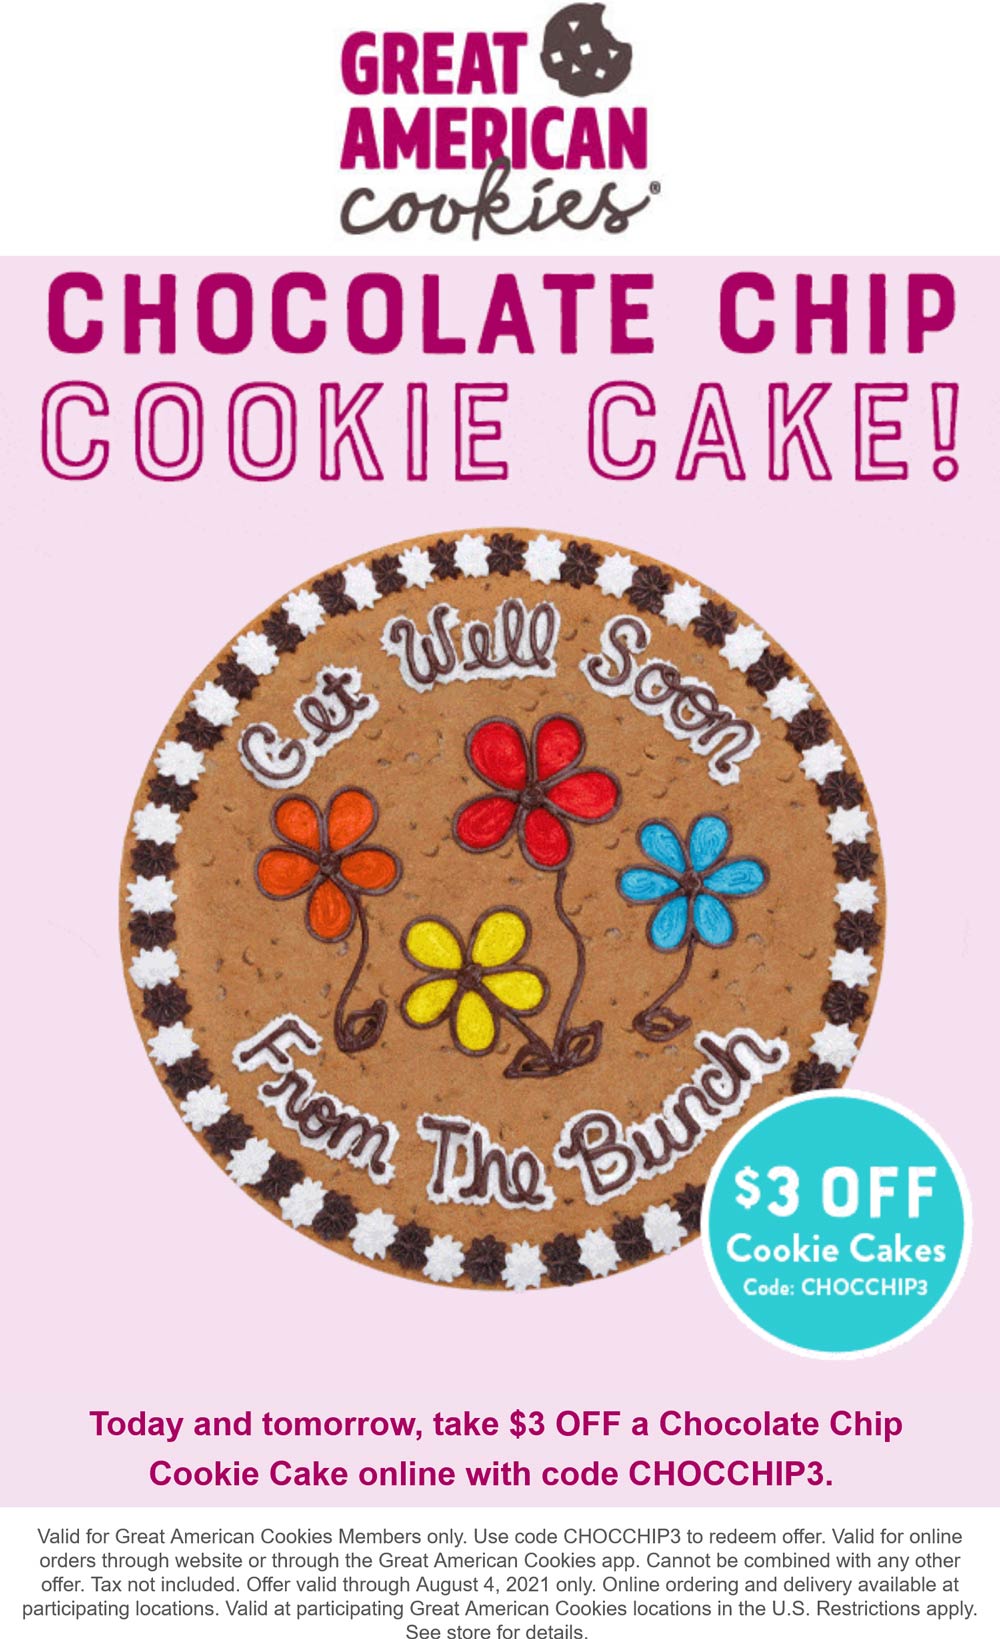 3 off cookie cakes today at Great American Cookies via promo code